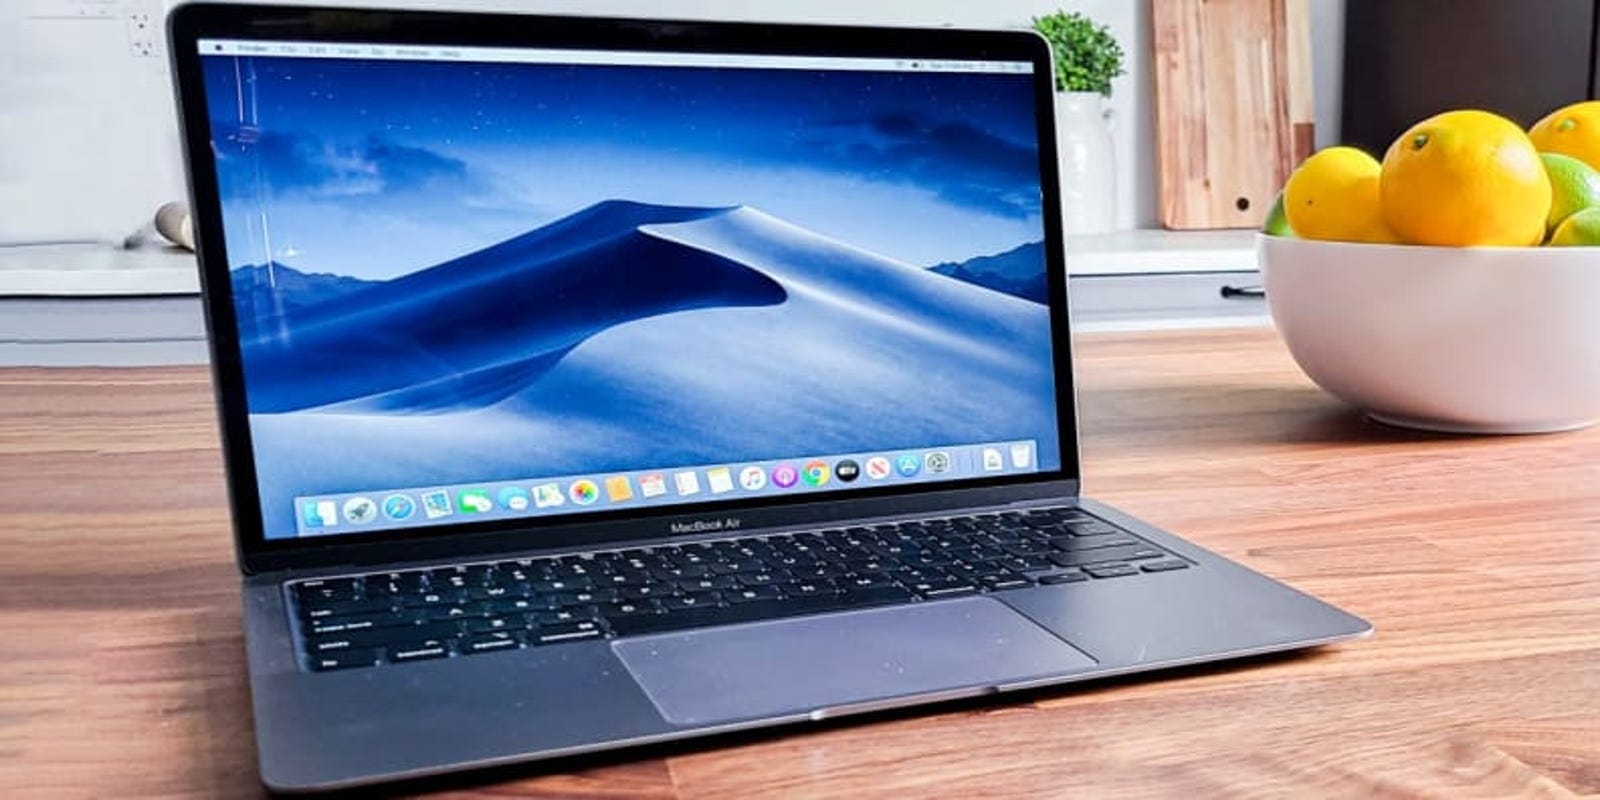 Black Friday 2020 The new M1 MacBook Air is 100 off at B&H